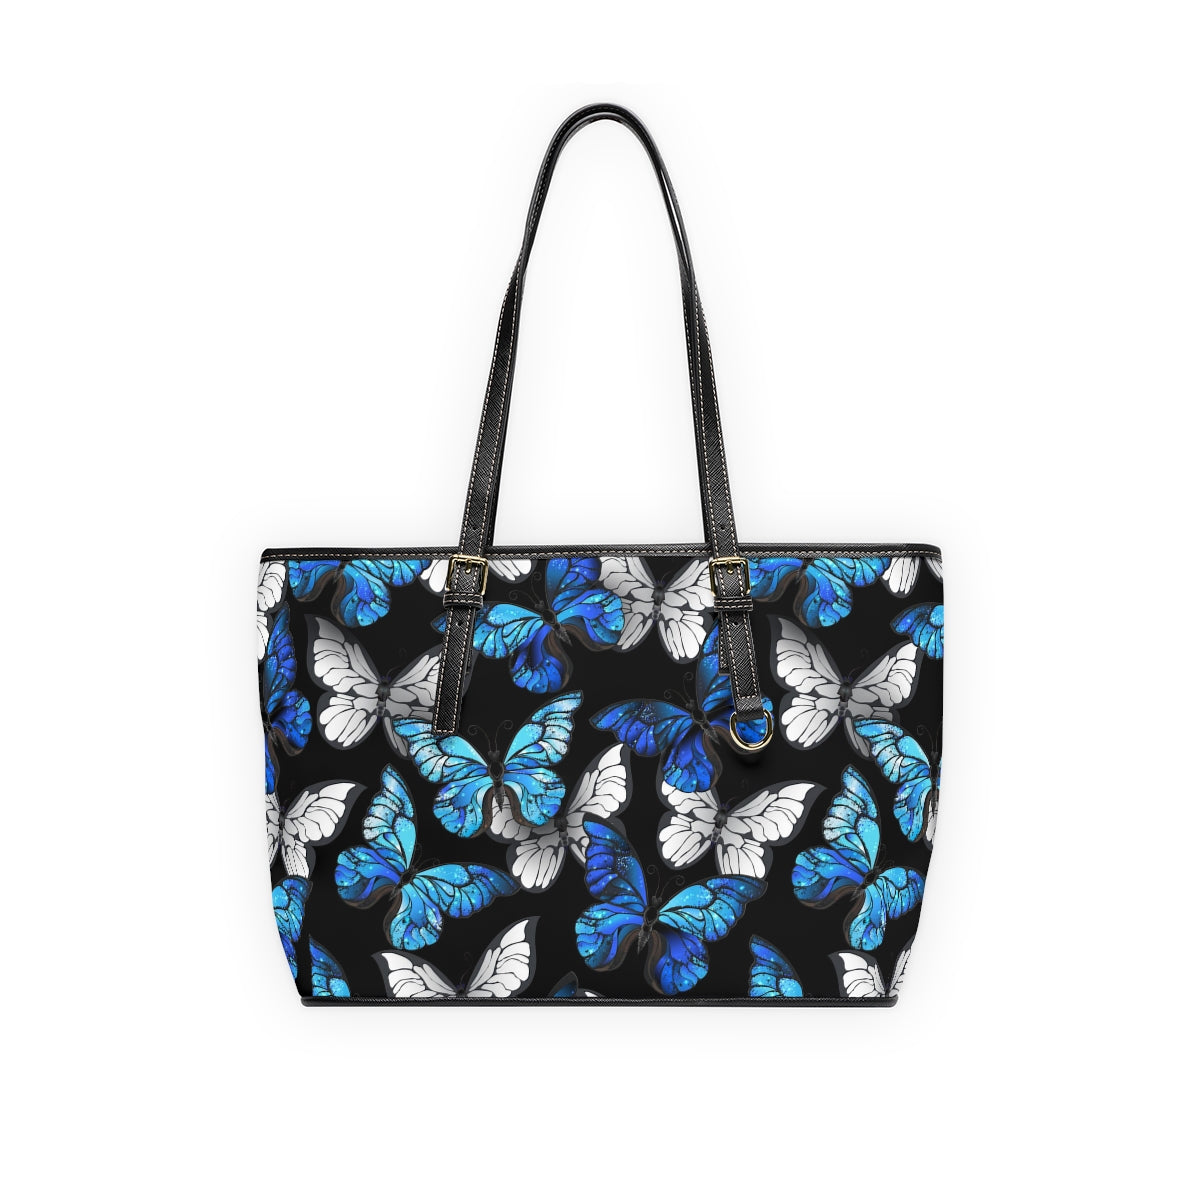 Blue With White Butterflies PU Leather Shoulder Bag